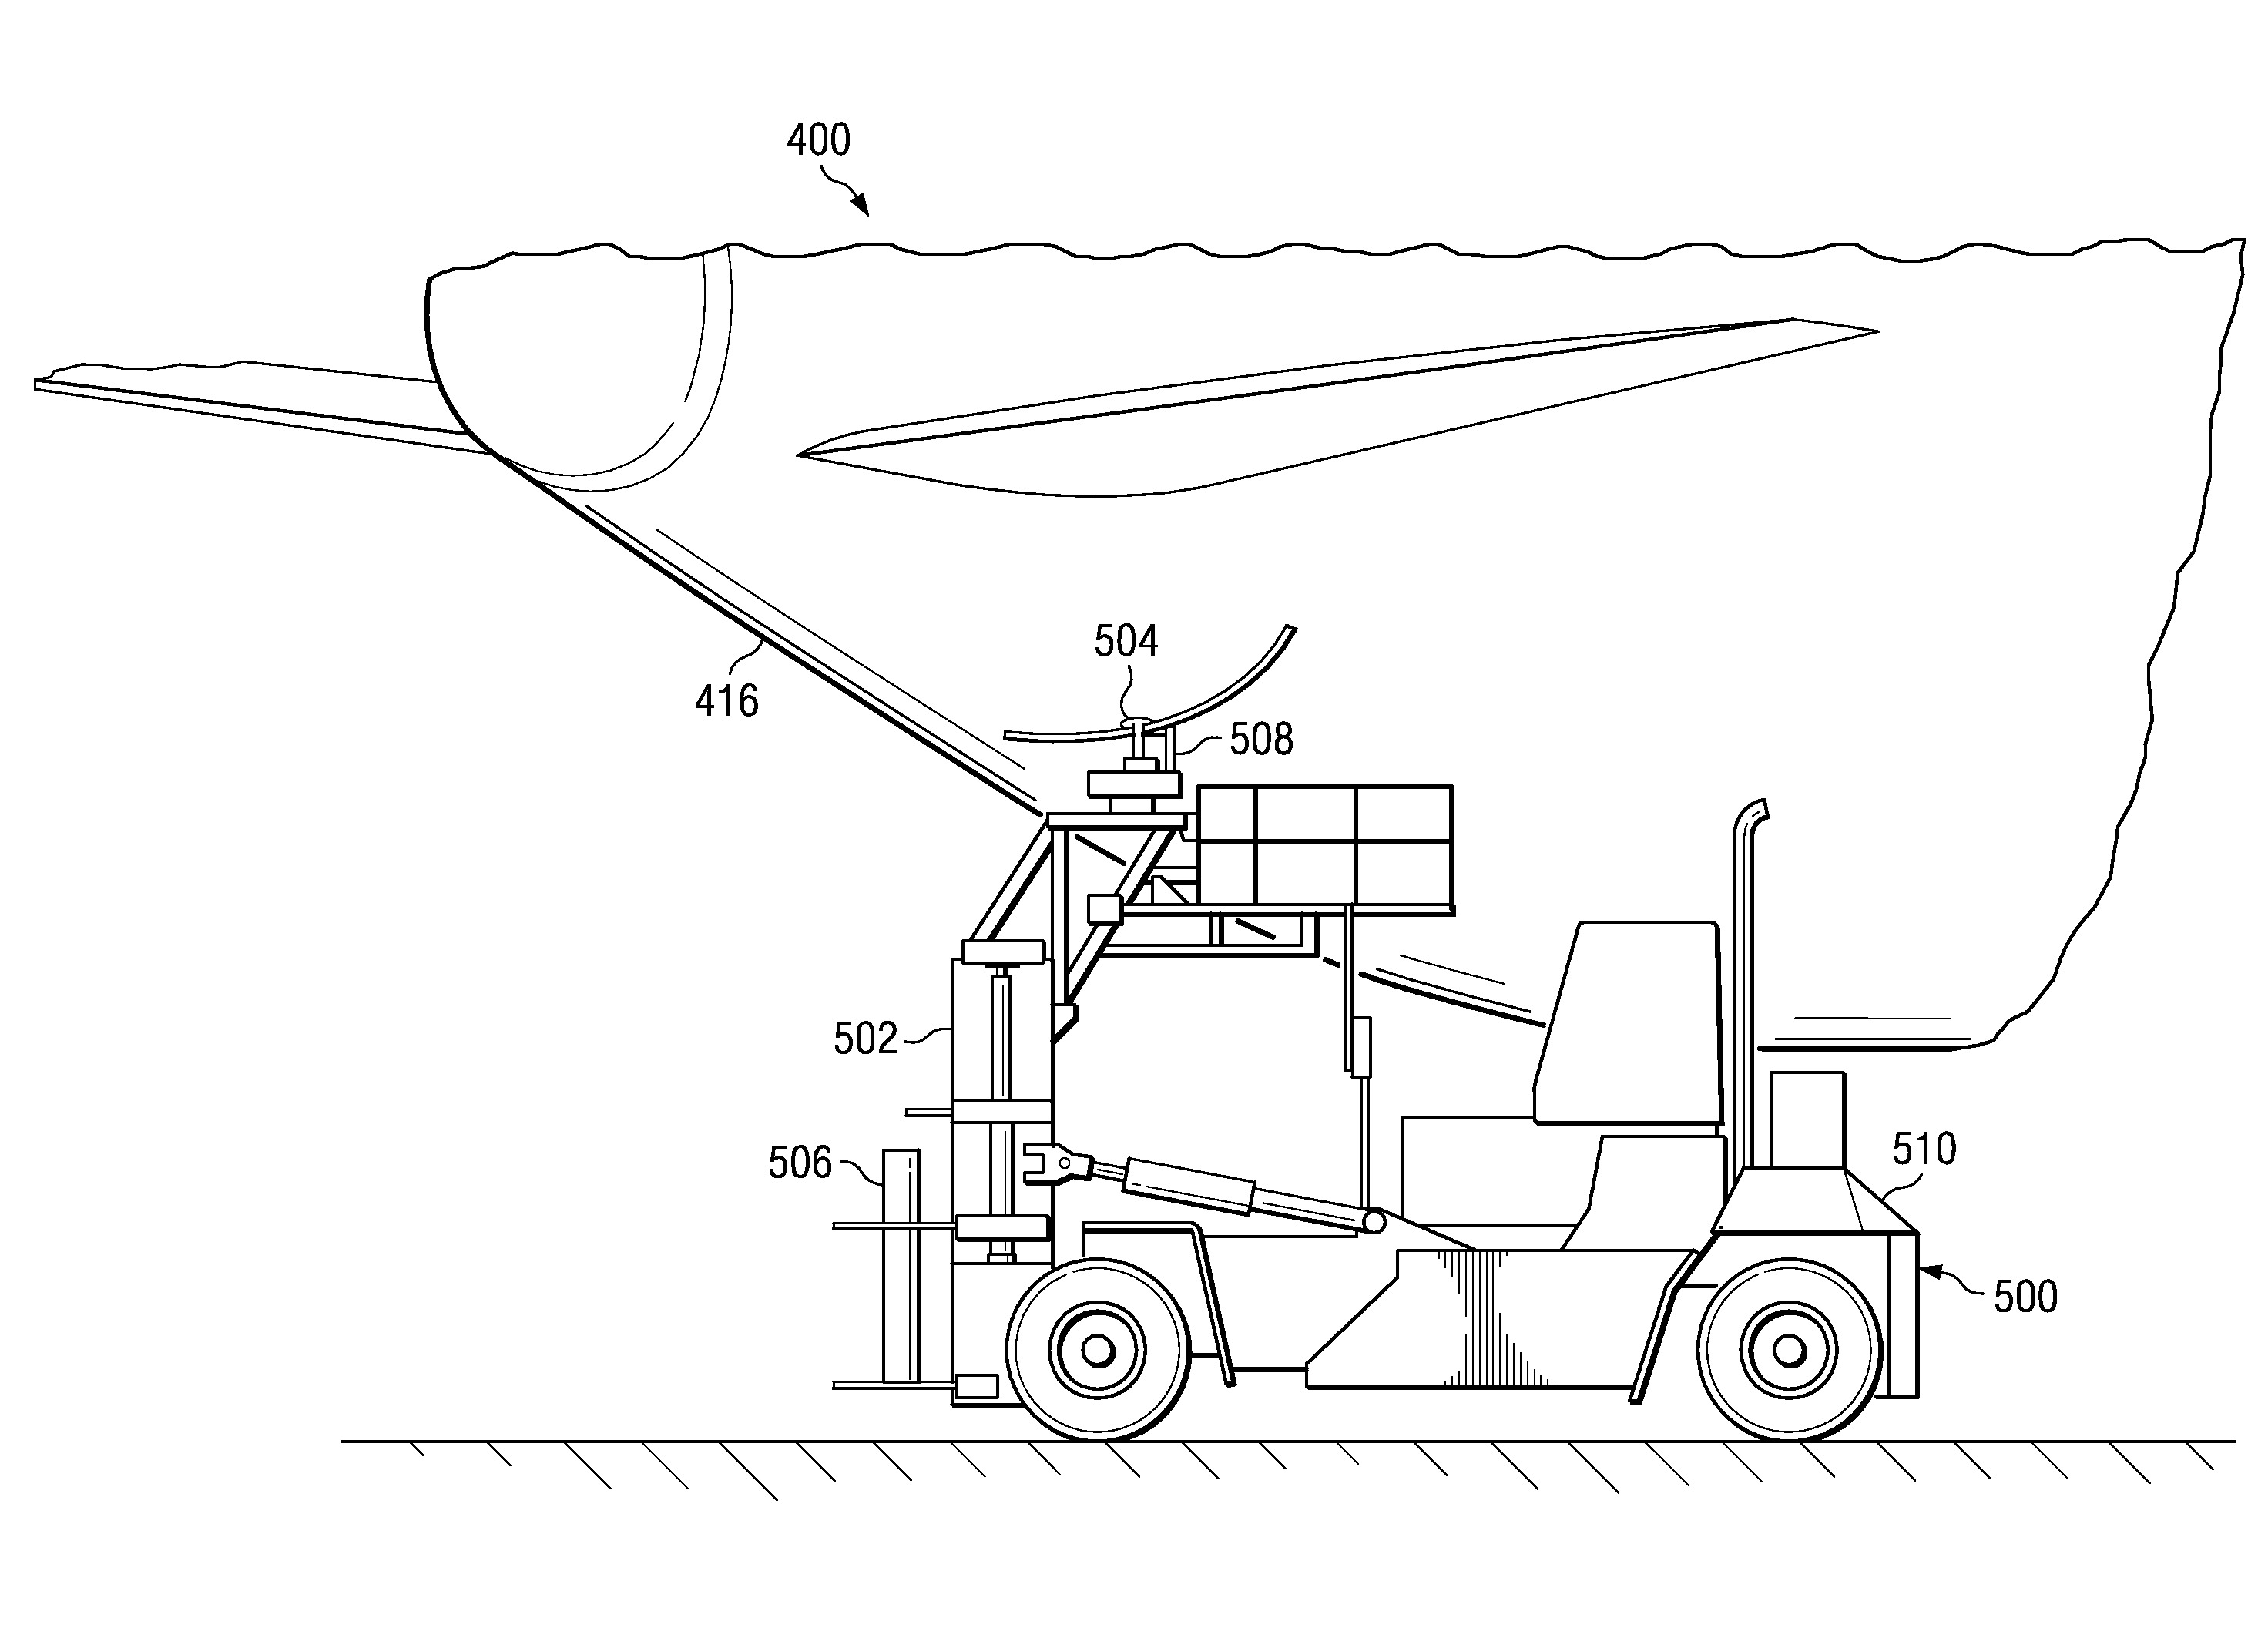 Method and apparatus for moving a swing tail cargo door on an aircraft